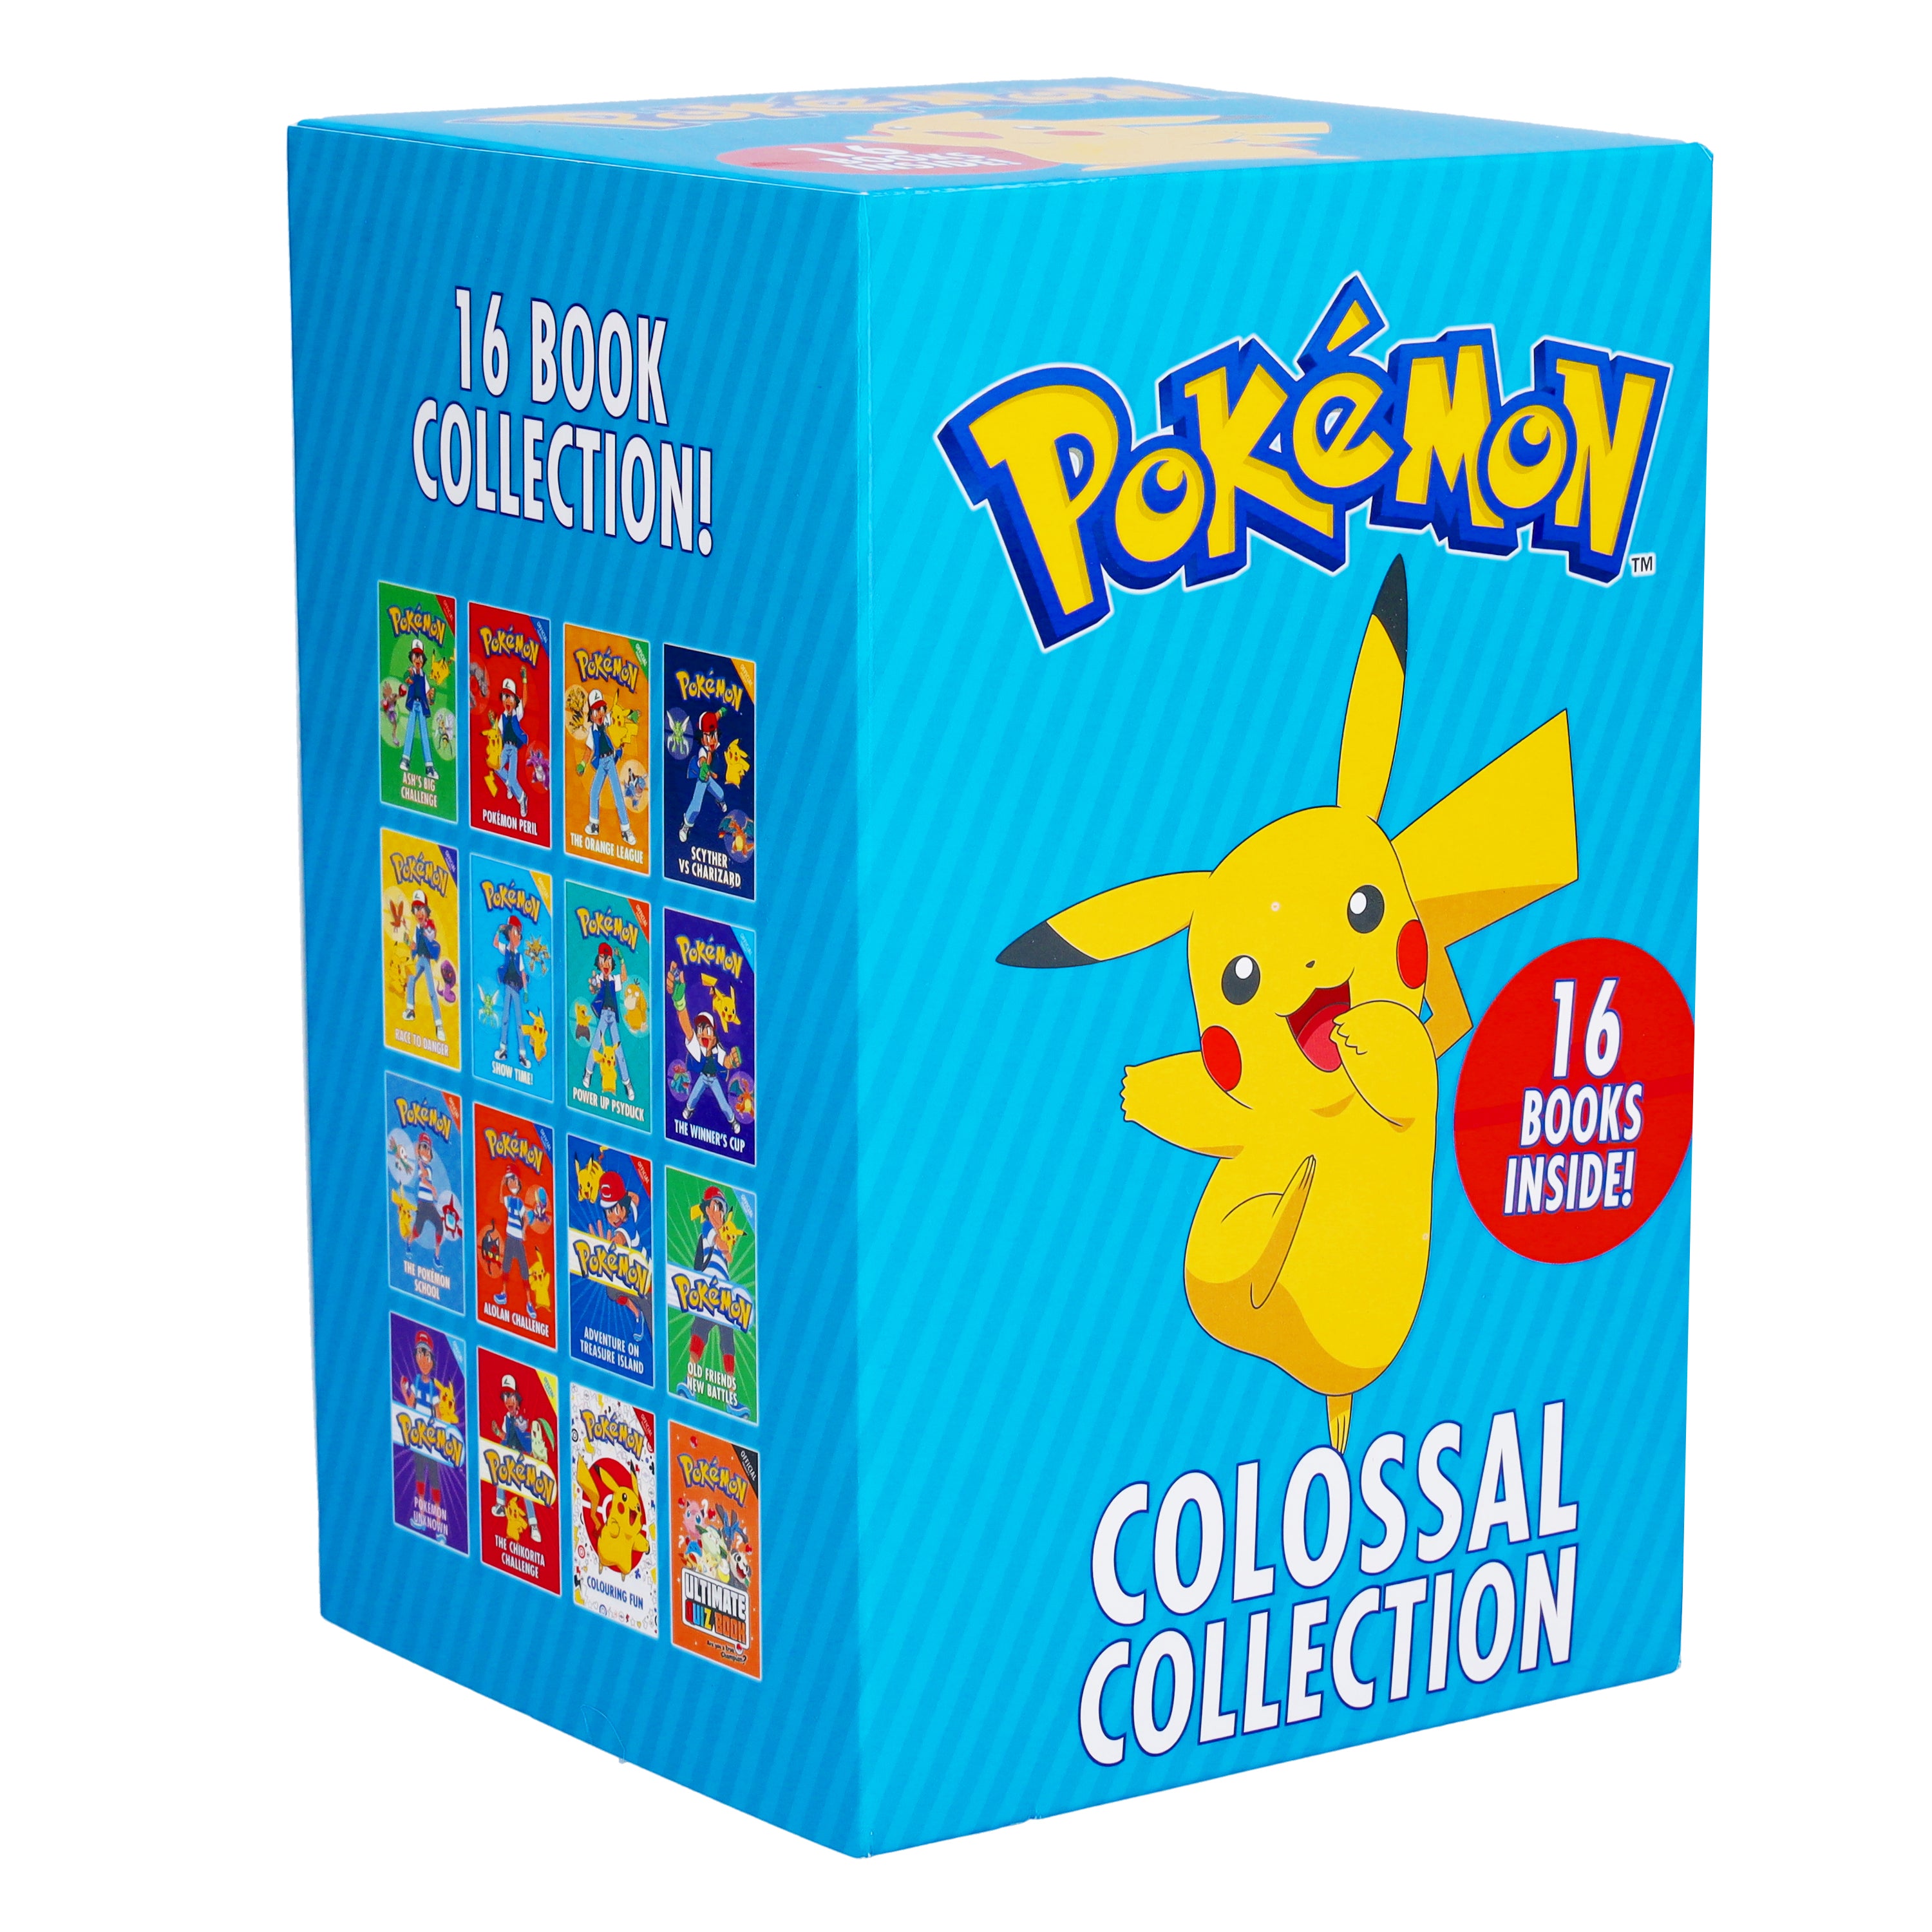 Pokemon Colossal Collection 16 Books Box Set By Tracey West - Ages 5-8 - Paperback